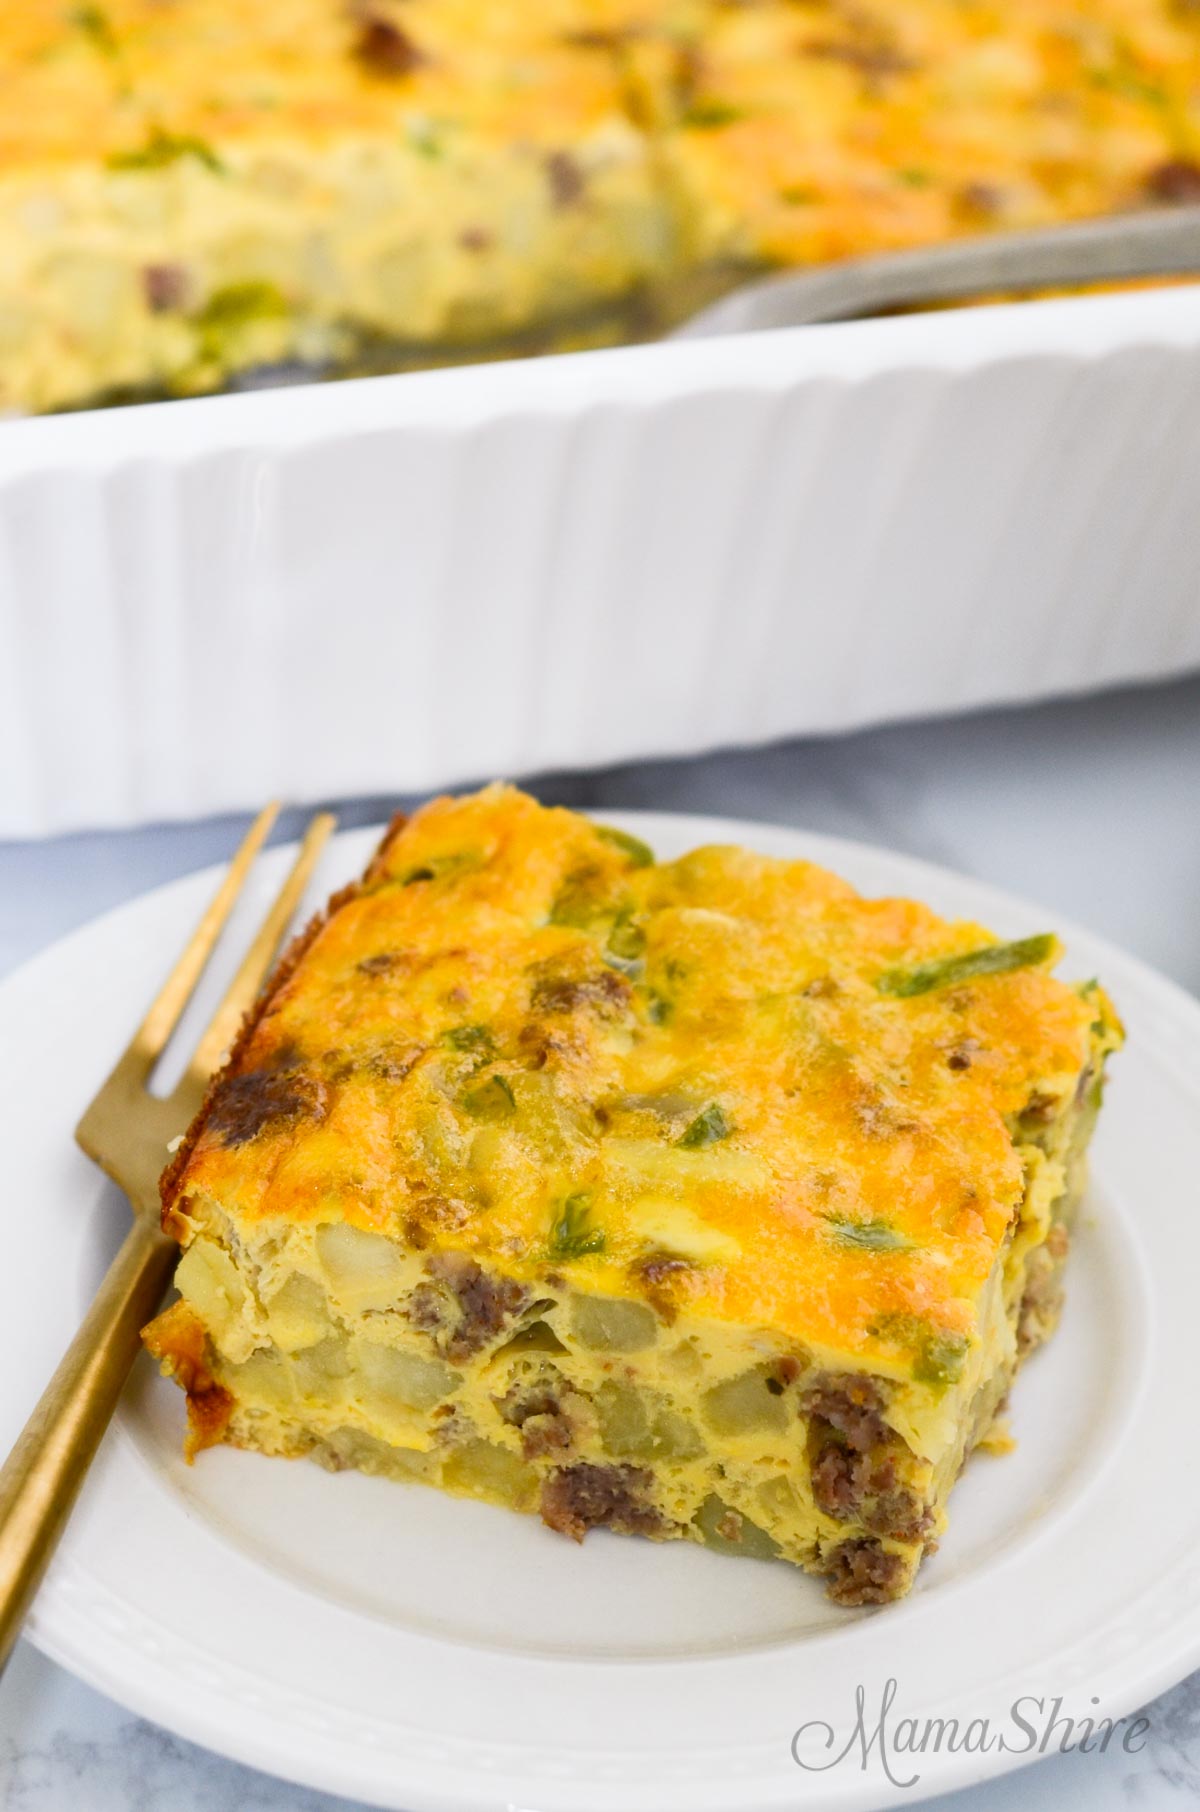 A serving of breakfast casserole made from a gluten-free dairy-free recipe.